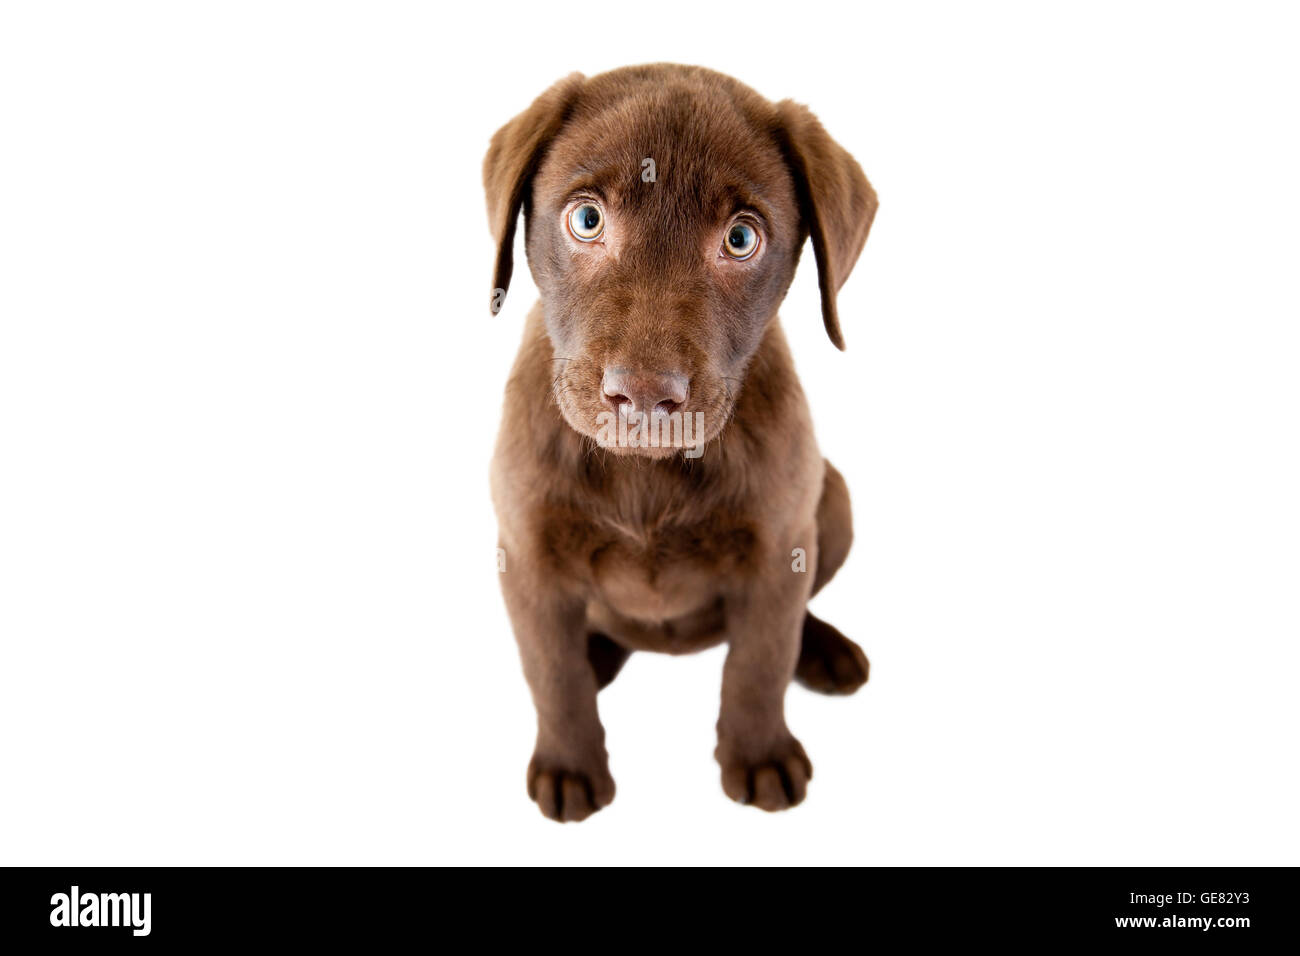 Brown puppy on a white background Stock Photo